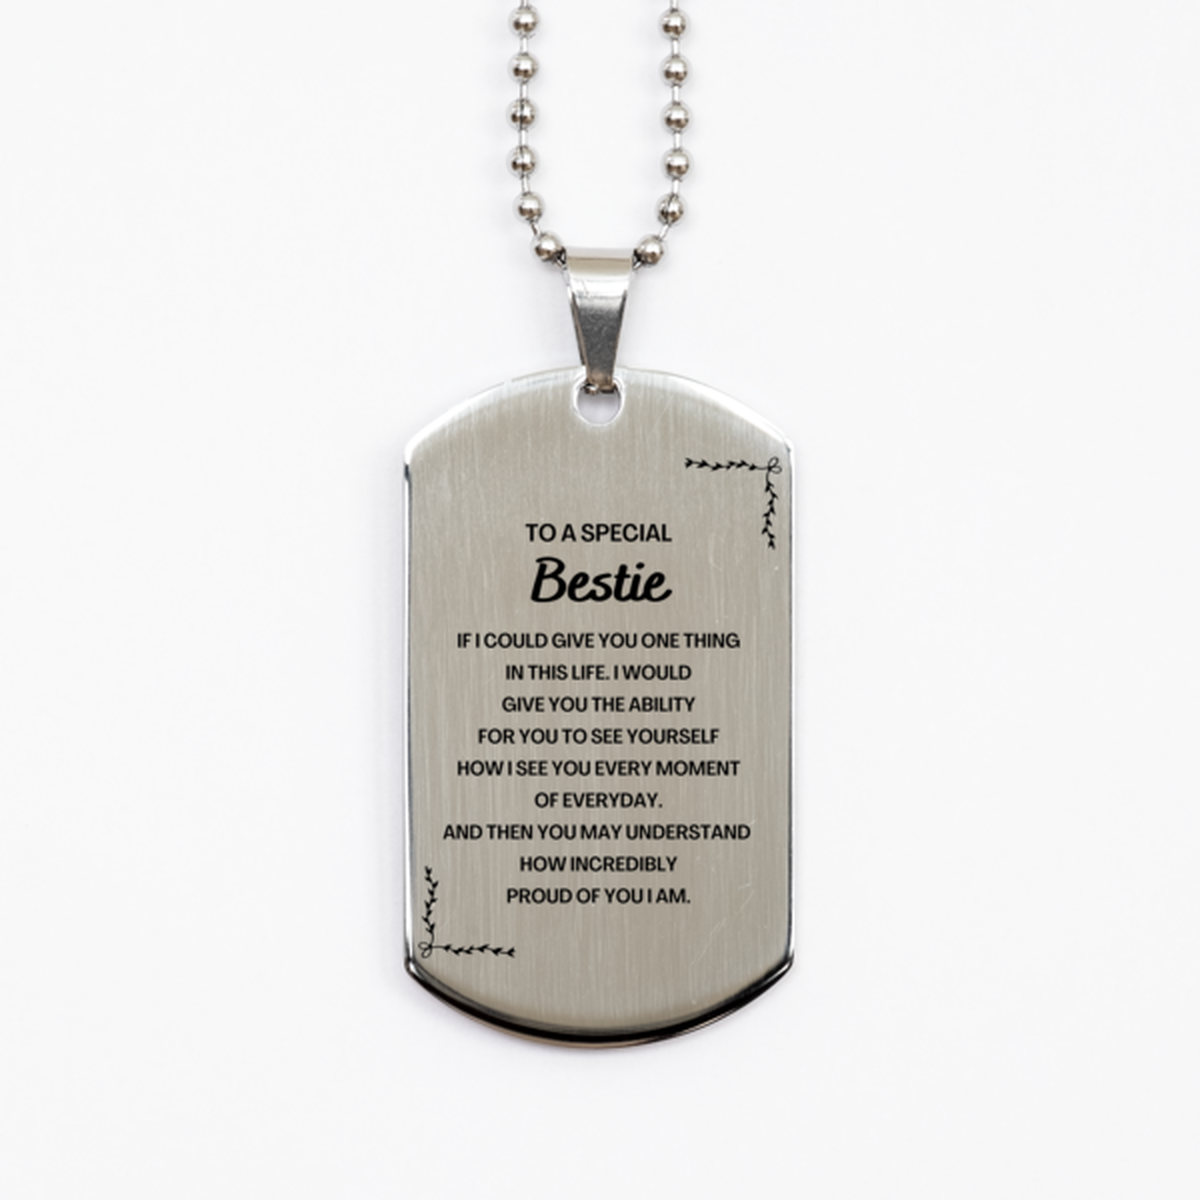 To My Bestie Silver Dog Tag, Gifts For Bestie Engraved, Inspirational Gifts for Christmas Birthday, Epic Gifts for Bestie To A Special Bestie how incredibly proud of you I am